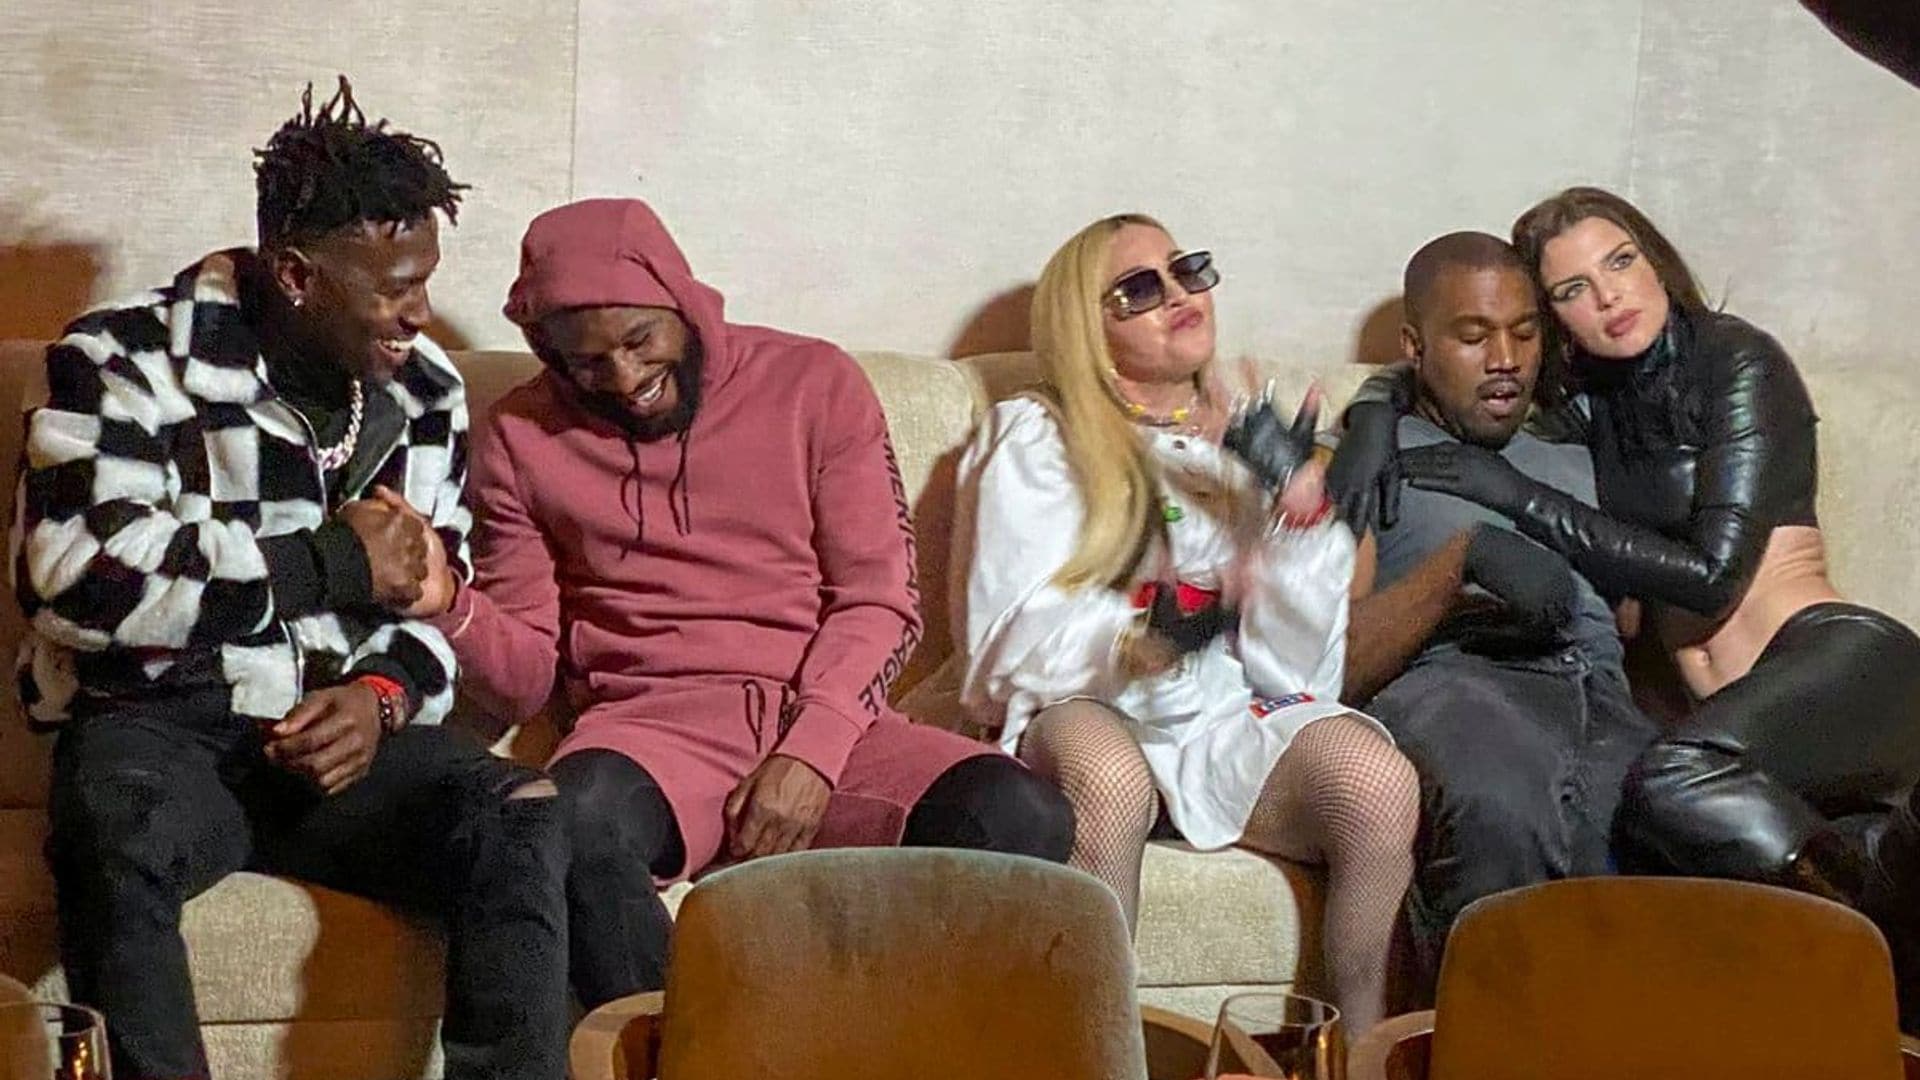 Madonna, Kanye West, Julia Fox, and Floyd Mayweather gather at a private party at Delilah